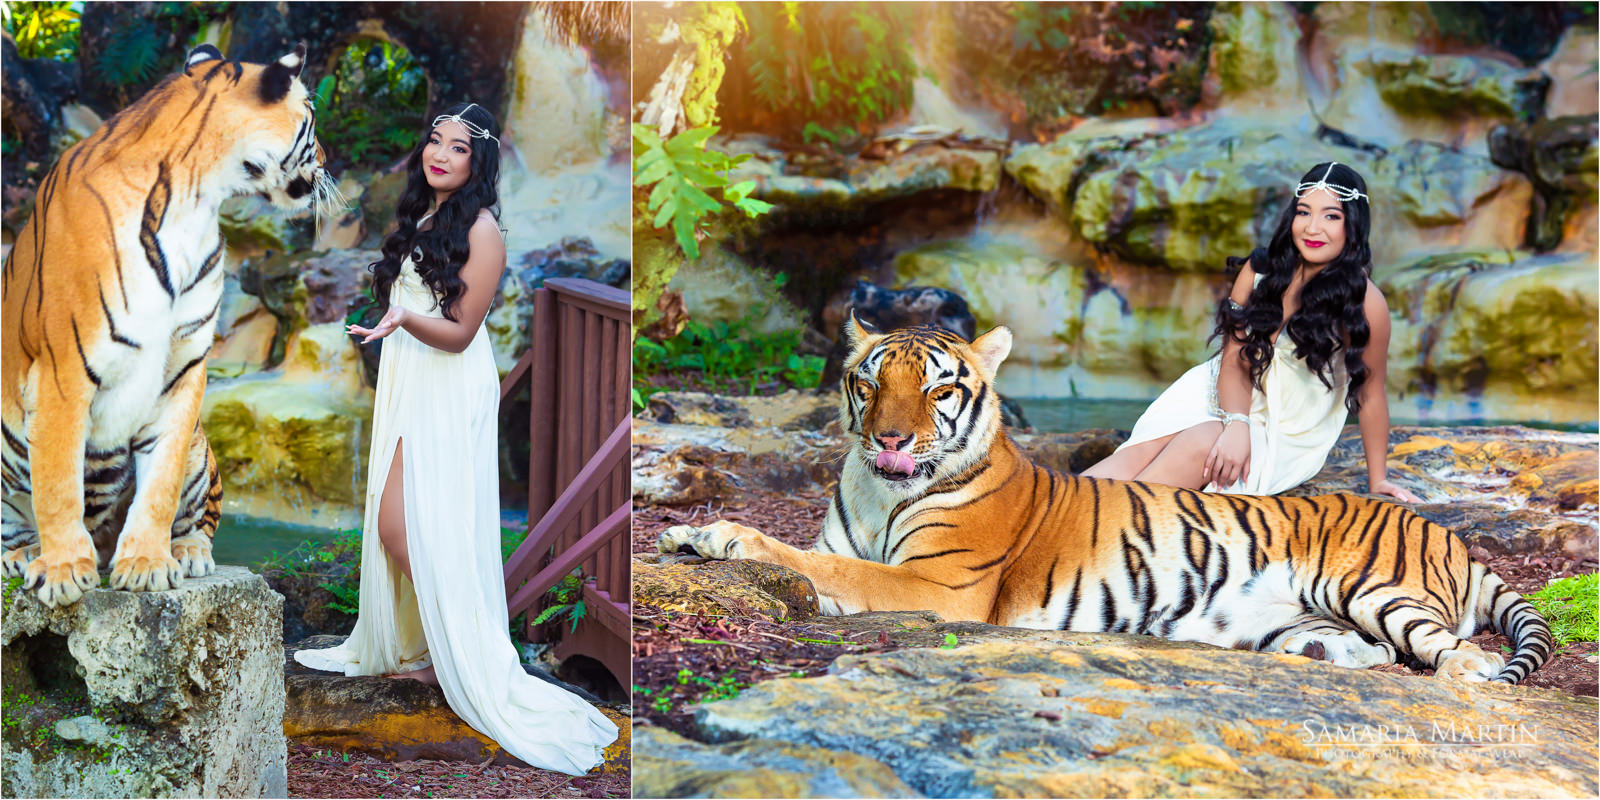 Quinceanera photoshoot with tiger, Miami dress rental, gown rental, quinceanera dress store, quince dress boutique